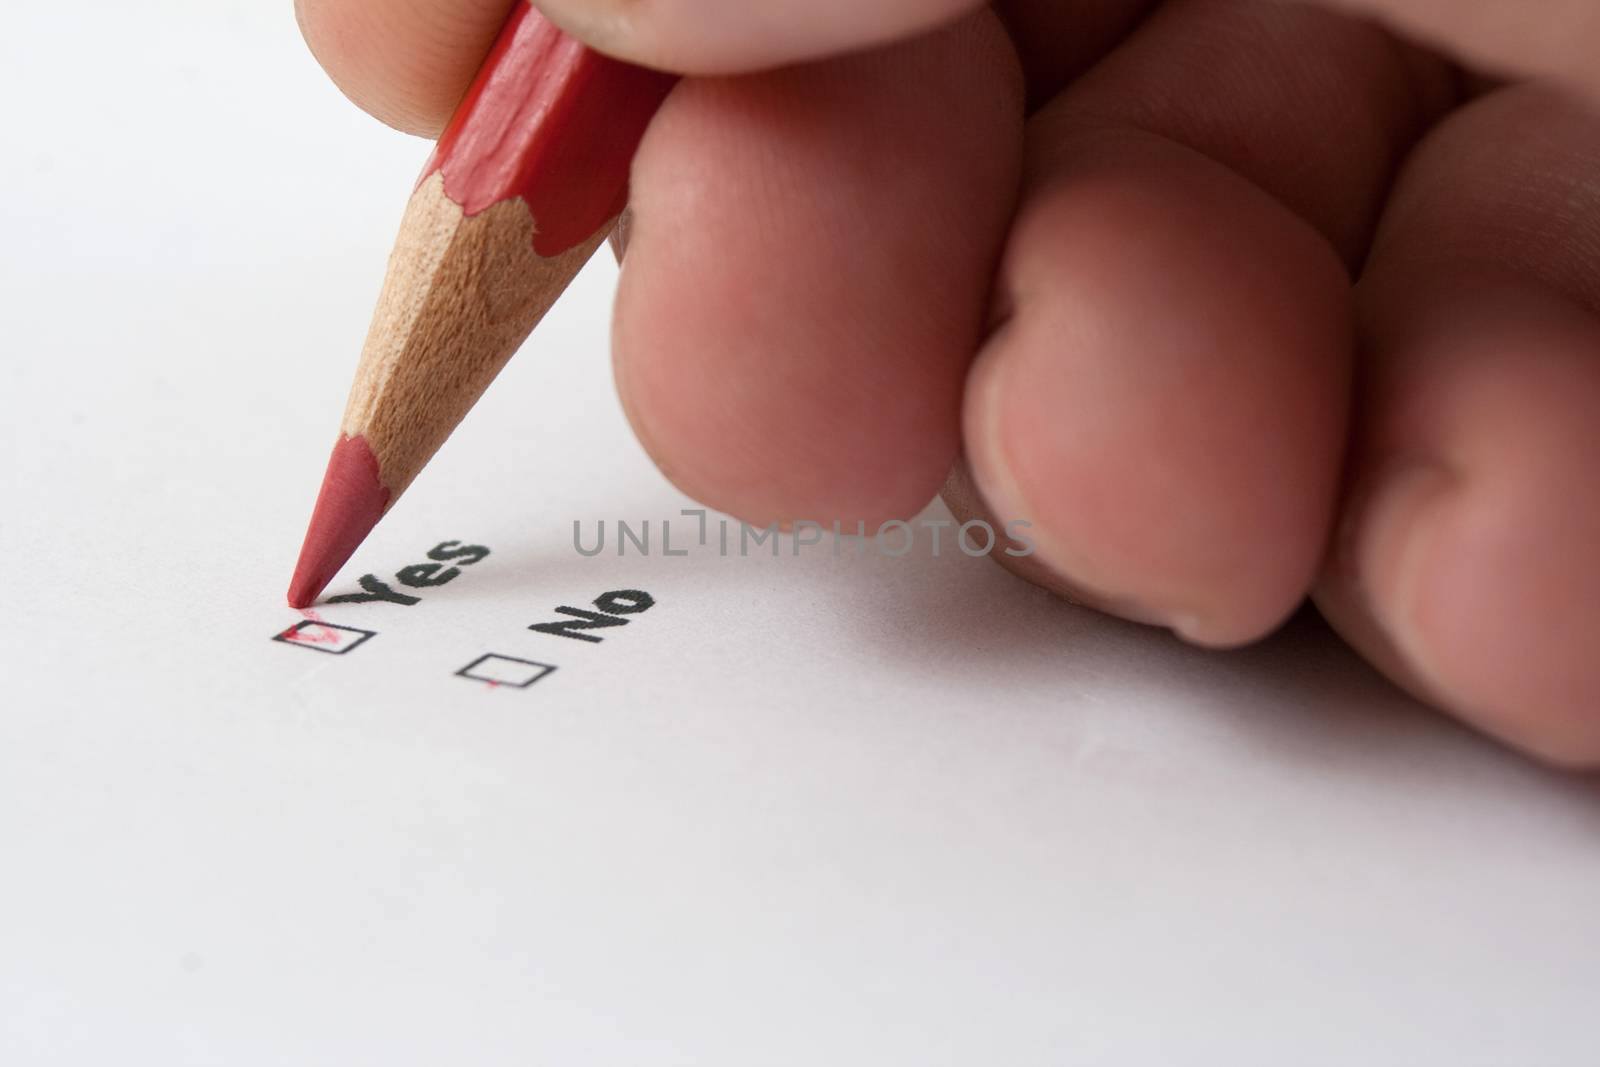 yes or no decition checkbox made with red pencil